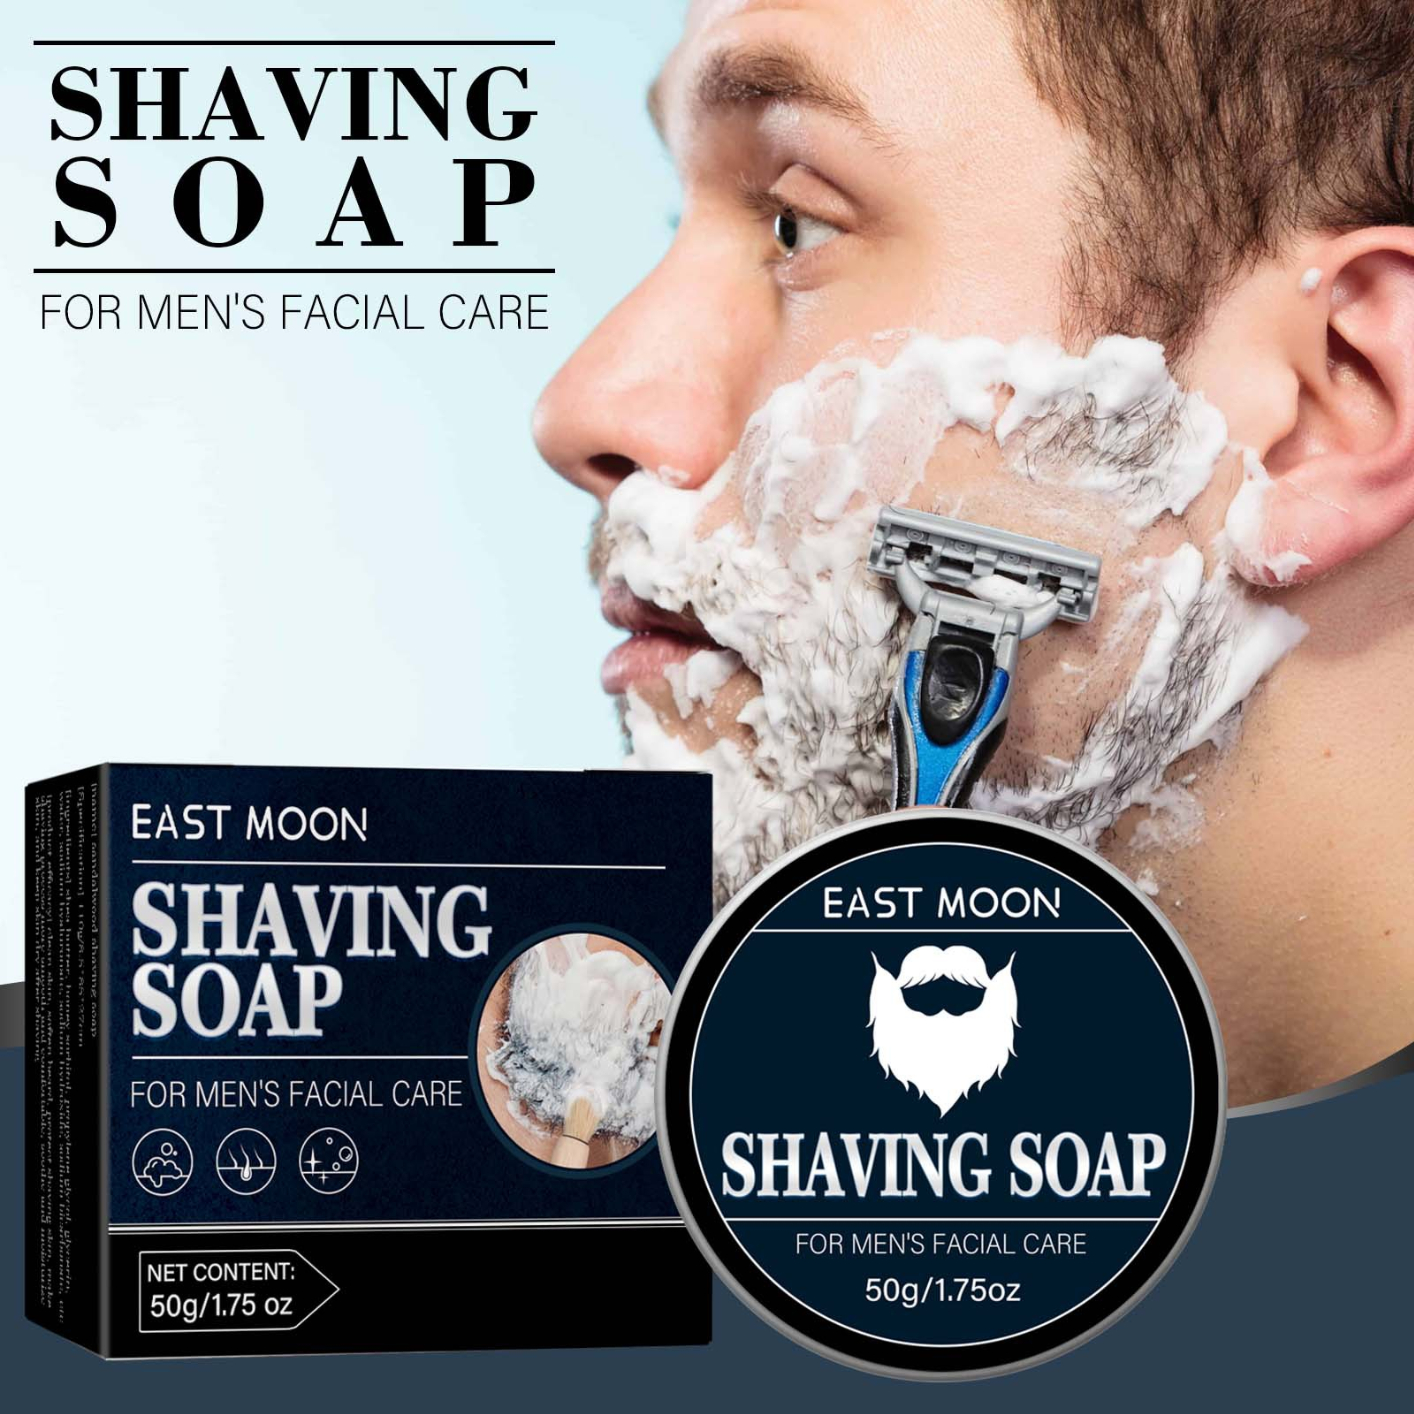 Luxury Shaving Soap Cream for Men - Soft, Smooth & Silky Shaving Soap - Rich Lather for the Smoothest Shave 50g